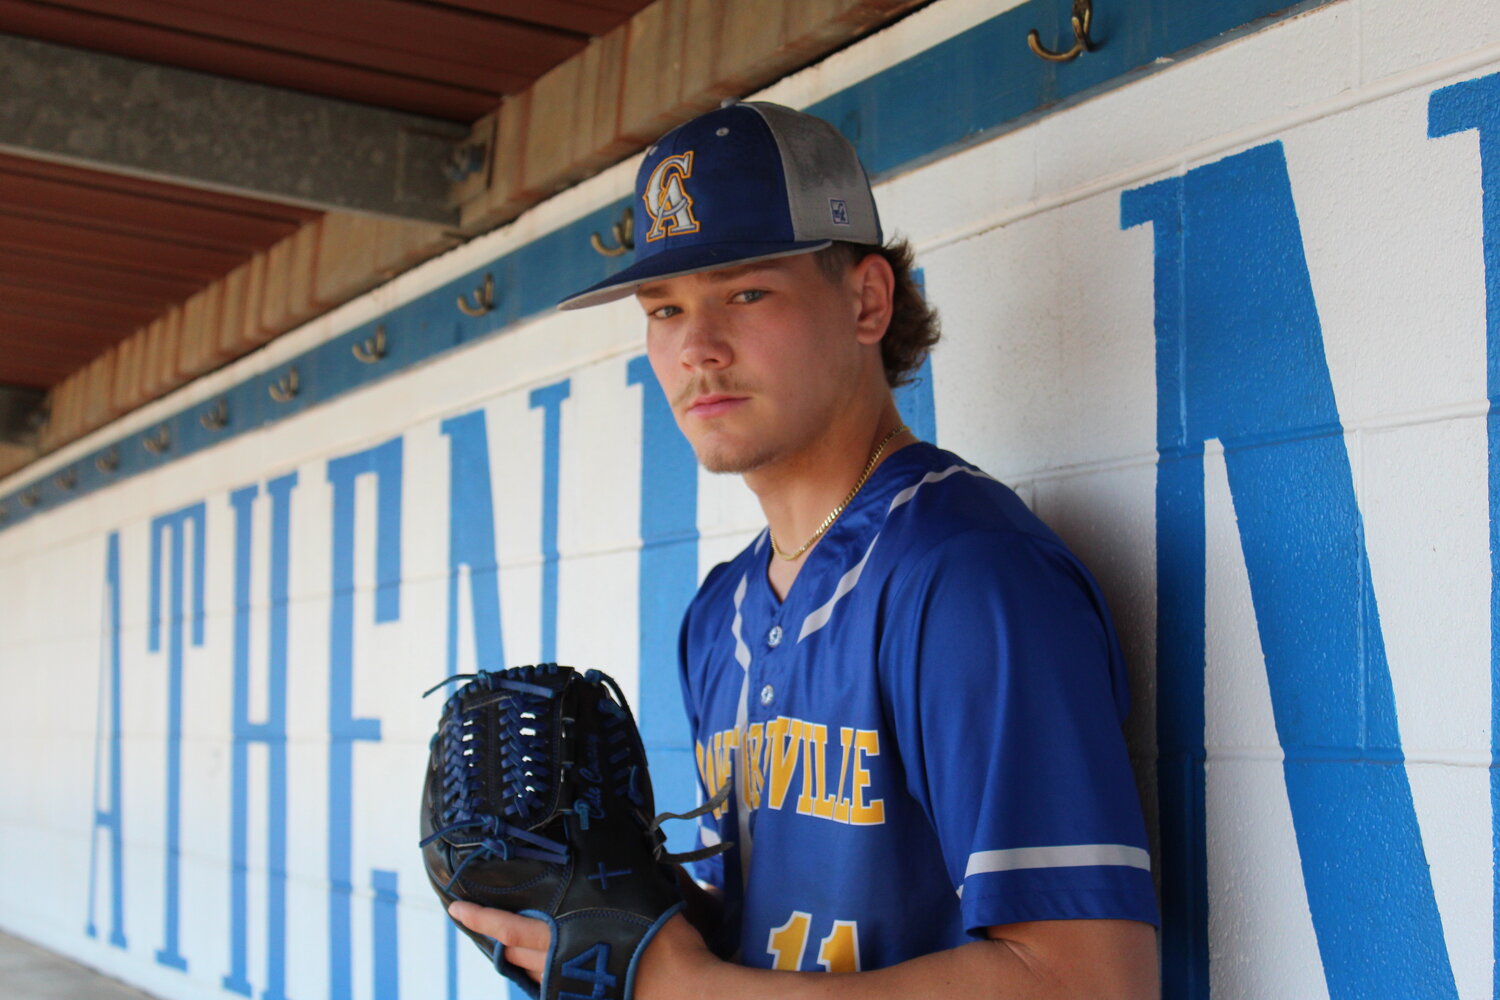 Crawfordsville senior Cale Coursey concluded his career with a stellar senior season. He struck out 101 hitters on the mound to go along with a .441 average at the plate. Coursey will go on to continue his career at Parkland Junior College next spring.